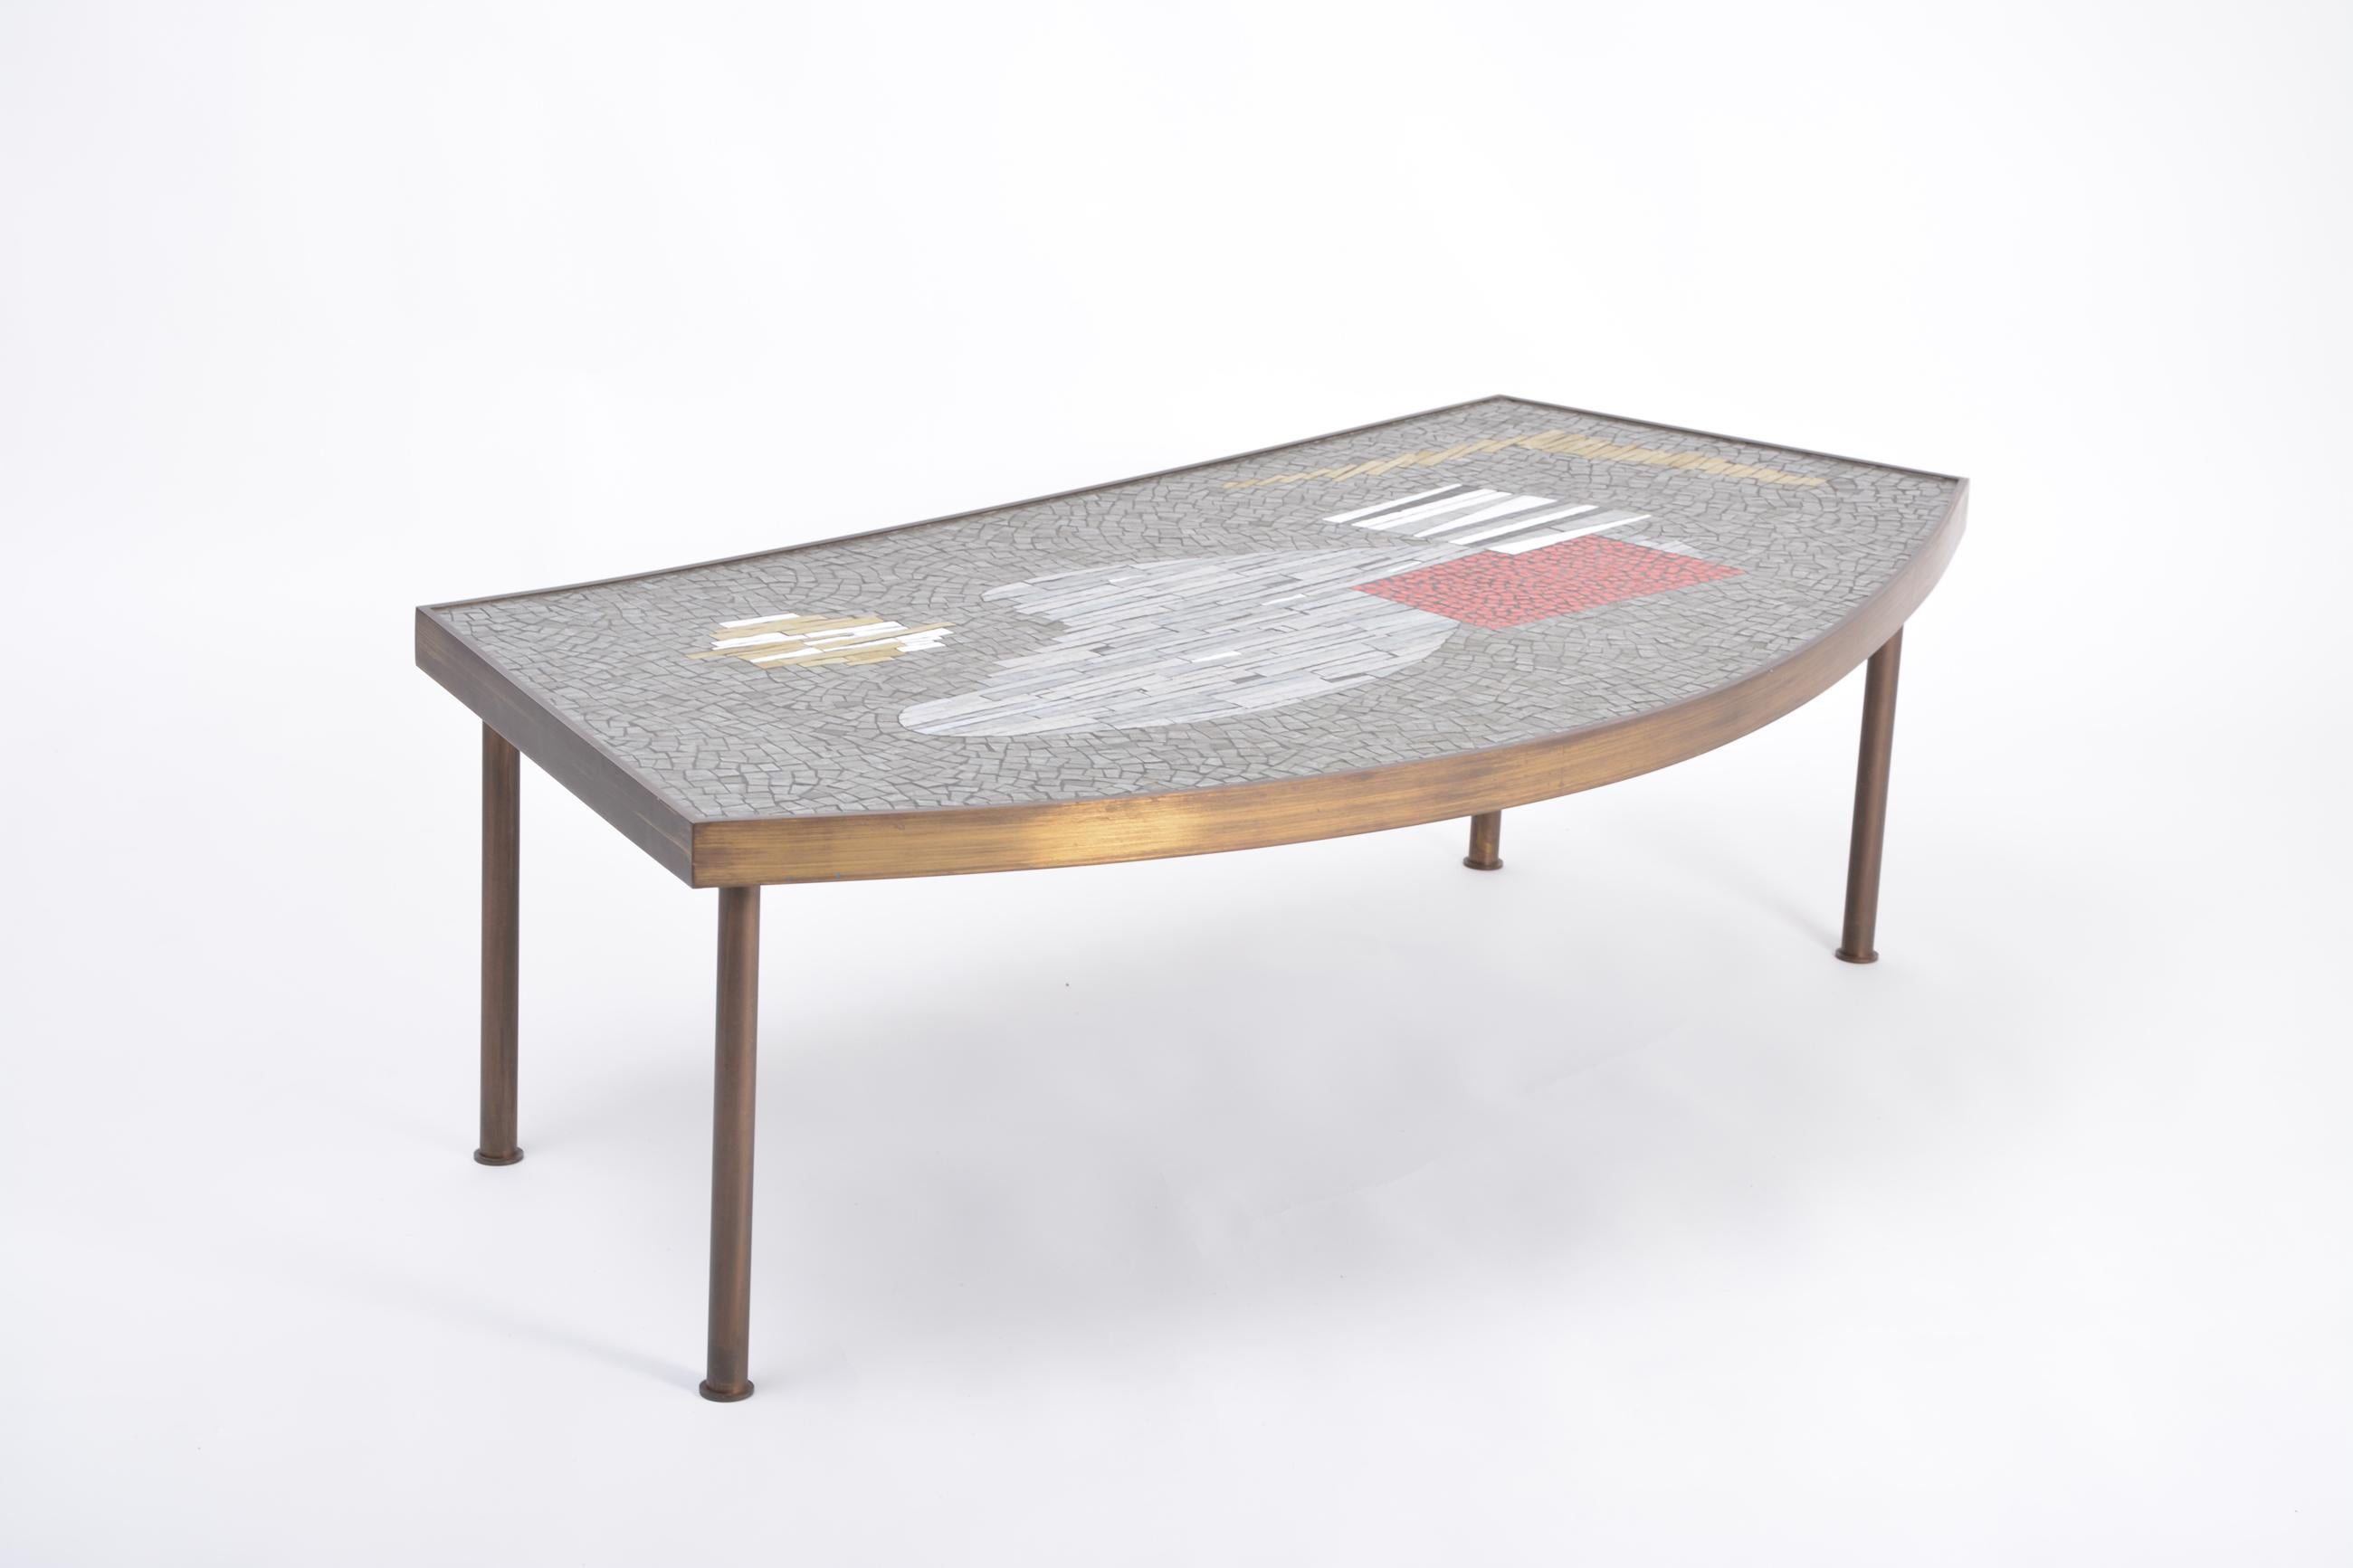 Large Midcentury Mosaic and Brass Coffee Table by Berthold Müller-Oerlinghausen
A large and unusually shaped mosaic coffee table designed by German Artist Berthold Müller-Oerlinghausen (1893-1979) in the 1950s.
The mosaic tiles sit on a wooden